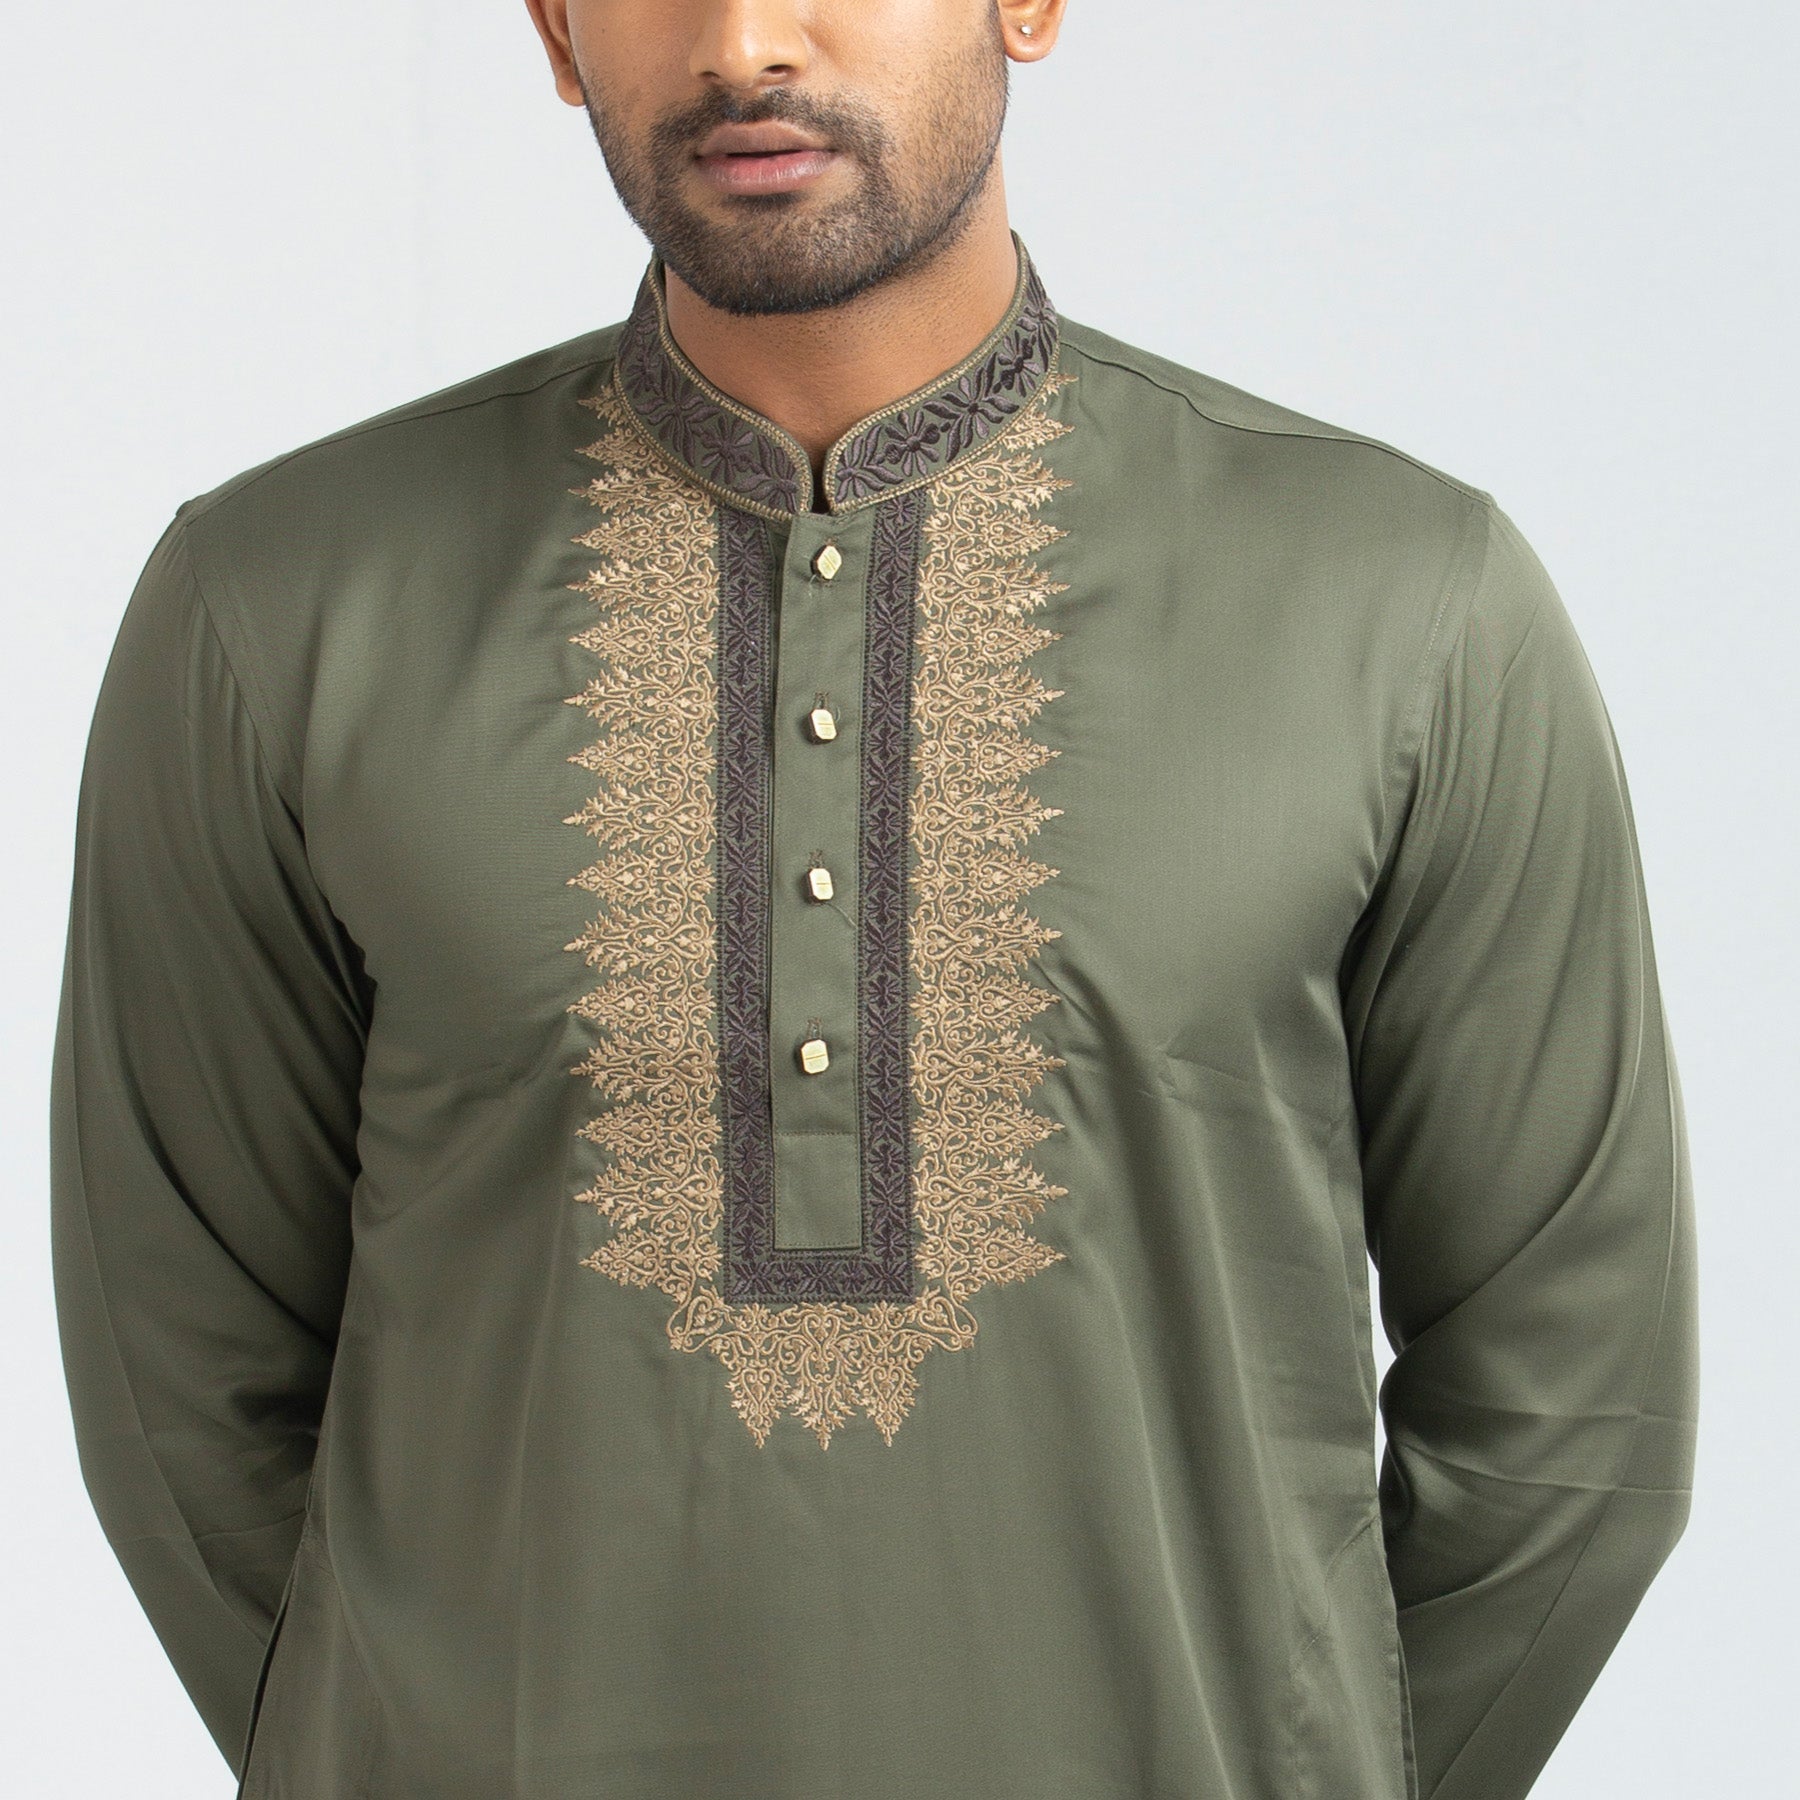  View details for Olive Slim Fit Embroidered Panjabi Olive Slim Fit Embroidered Panjabi